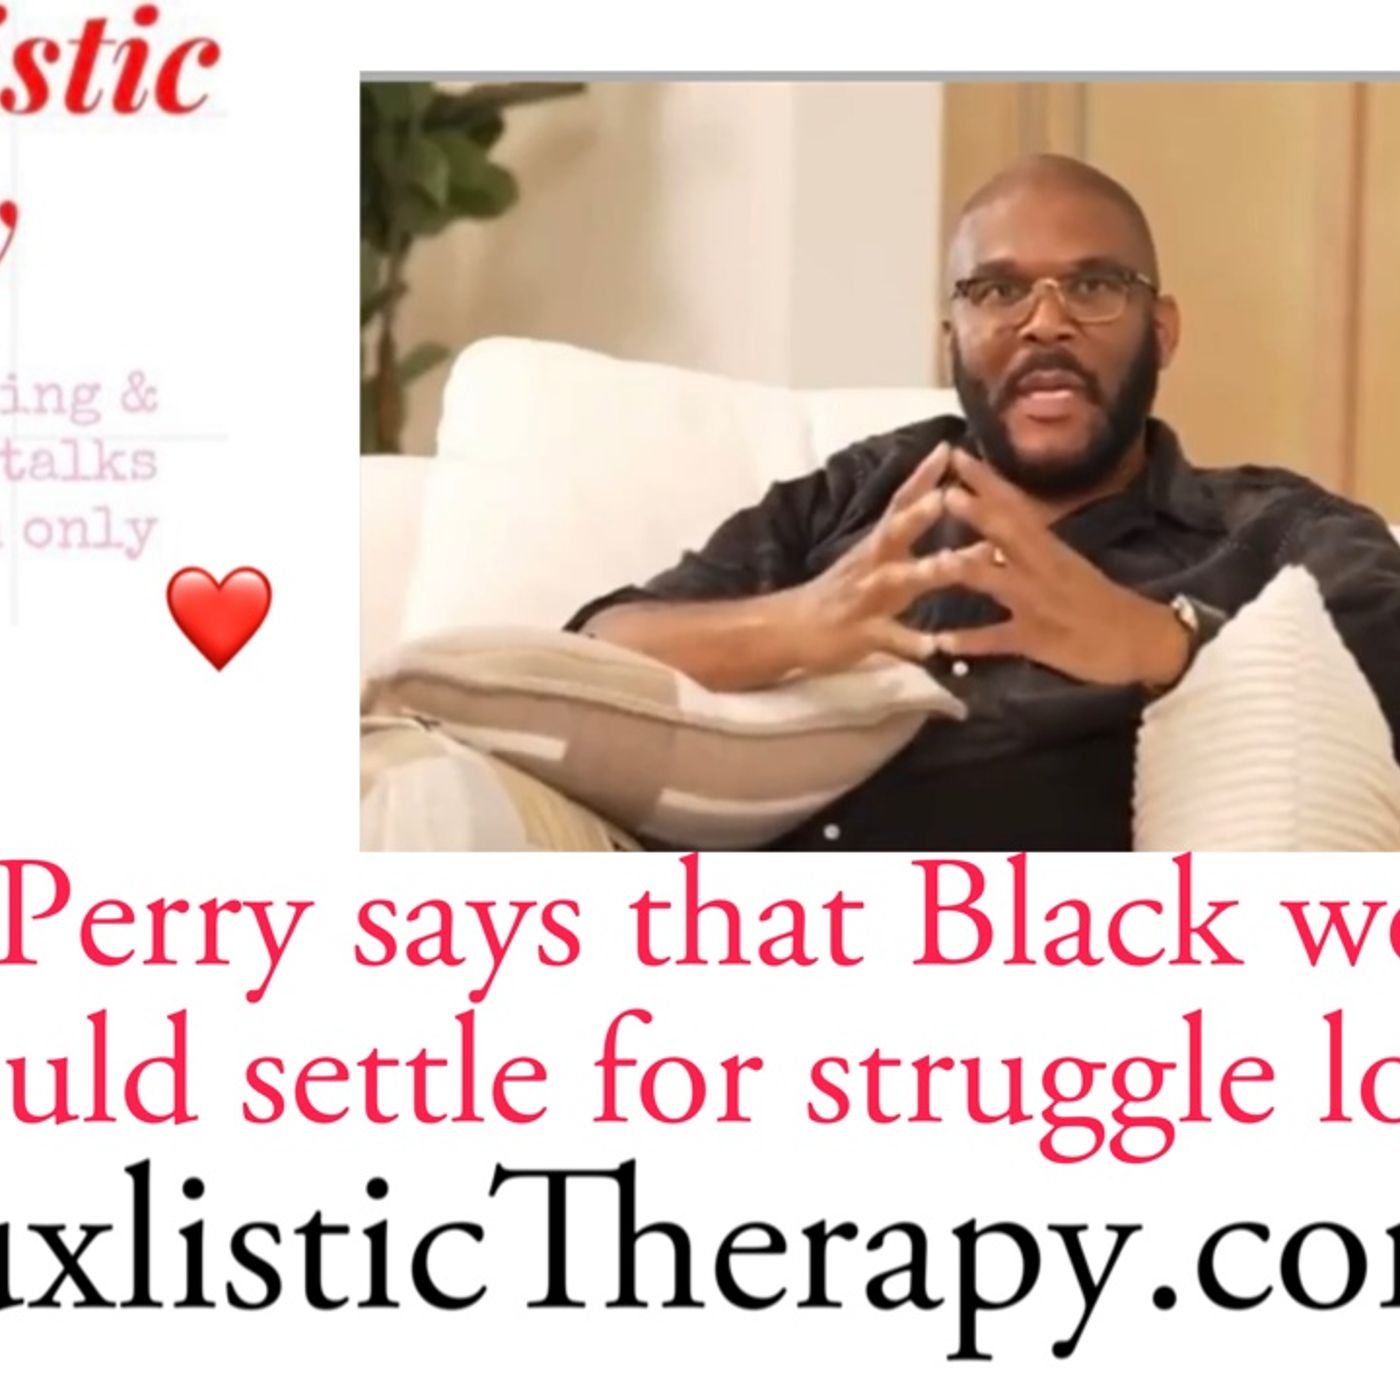 TYLER PERRY SAYS THAT HIGH EARNING BLACK WOMEN SHOULD DATE POOR MEN WHO CAN ONLY PAY THE LIGHT BILL